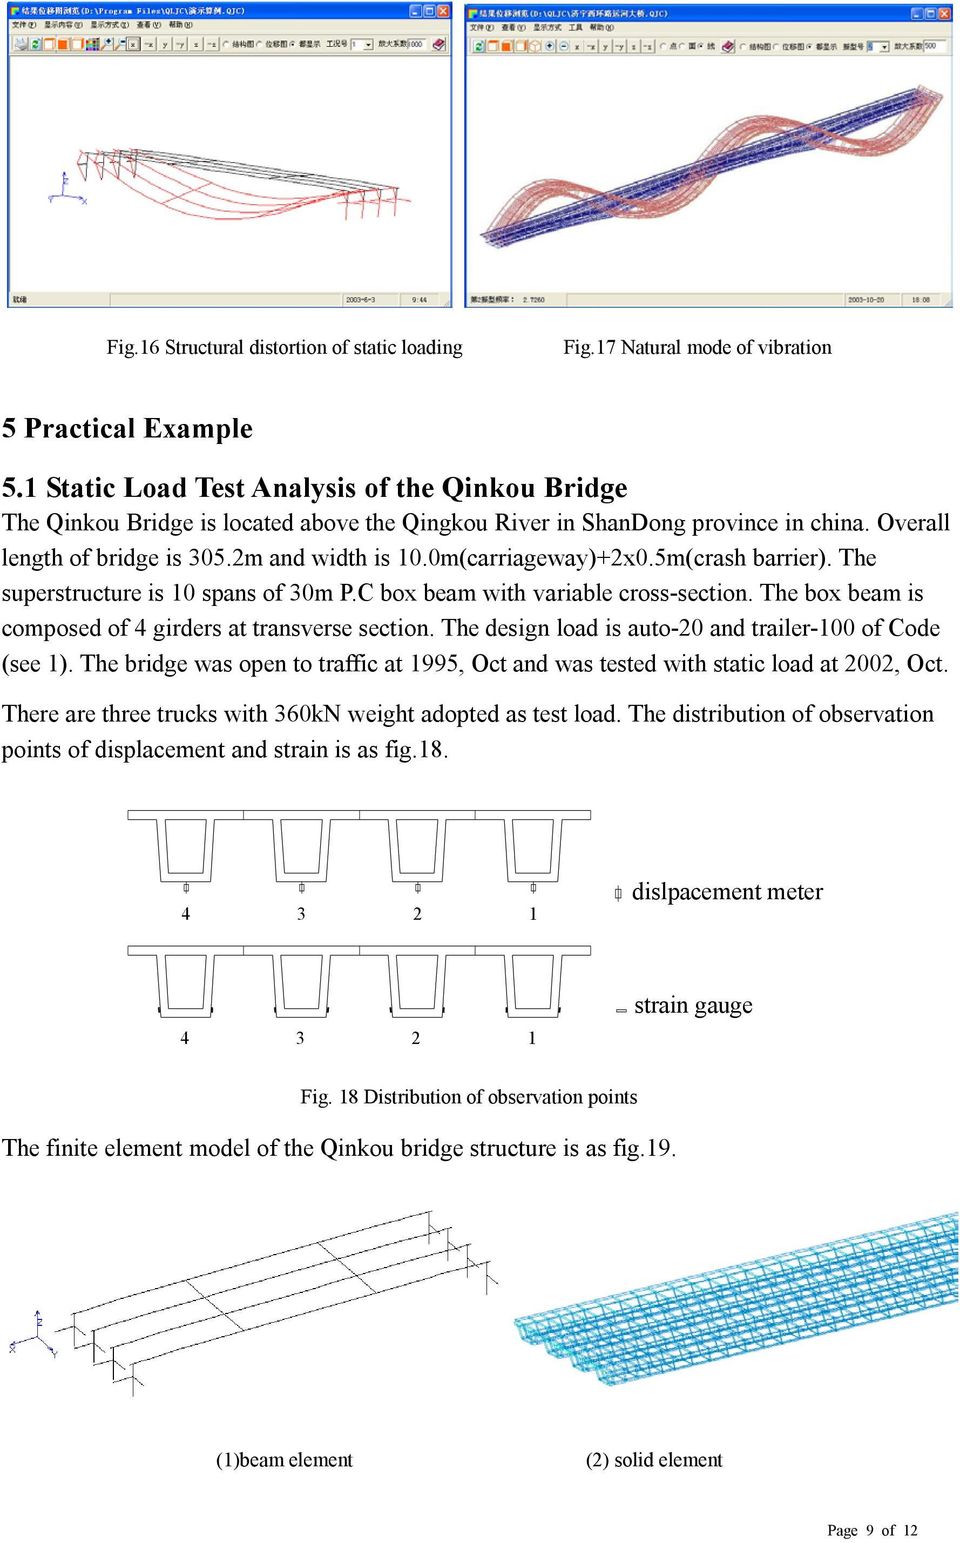 0m(carriageway)+2x0.5m(crash barrier). The superstructure is 10 spans of 30m P.C box beam with variable cross-section. The box beam is composed of 4 girders at transverse section.